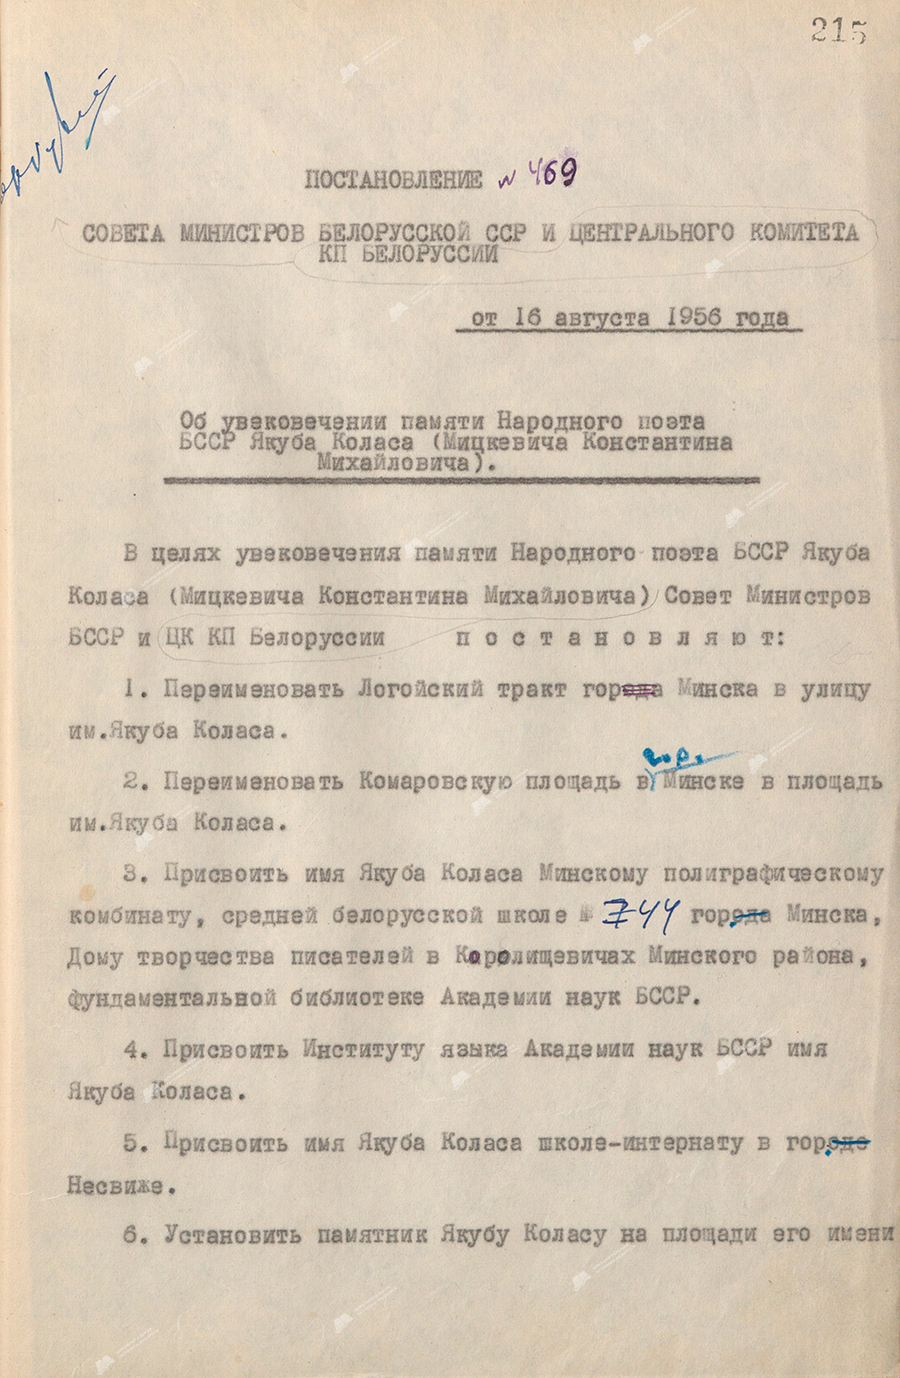 Resolution No. 469 of the Council of Ministers of the BSSR and the Central Committee of the Communist Party of Belarus «On perpetuating the memory of the People's Poet of the BSSR Yakub Kolas (Mitskevich Konstantin Mikhailovich)»-стр. 0